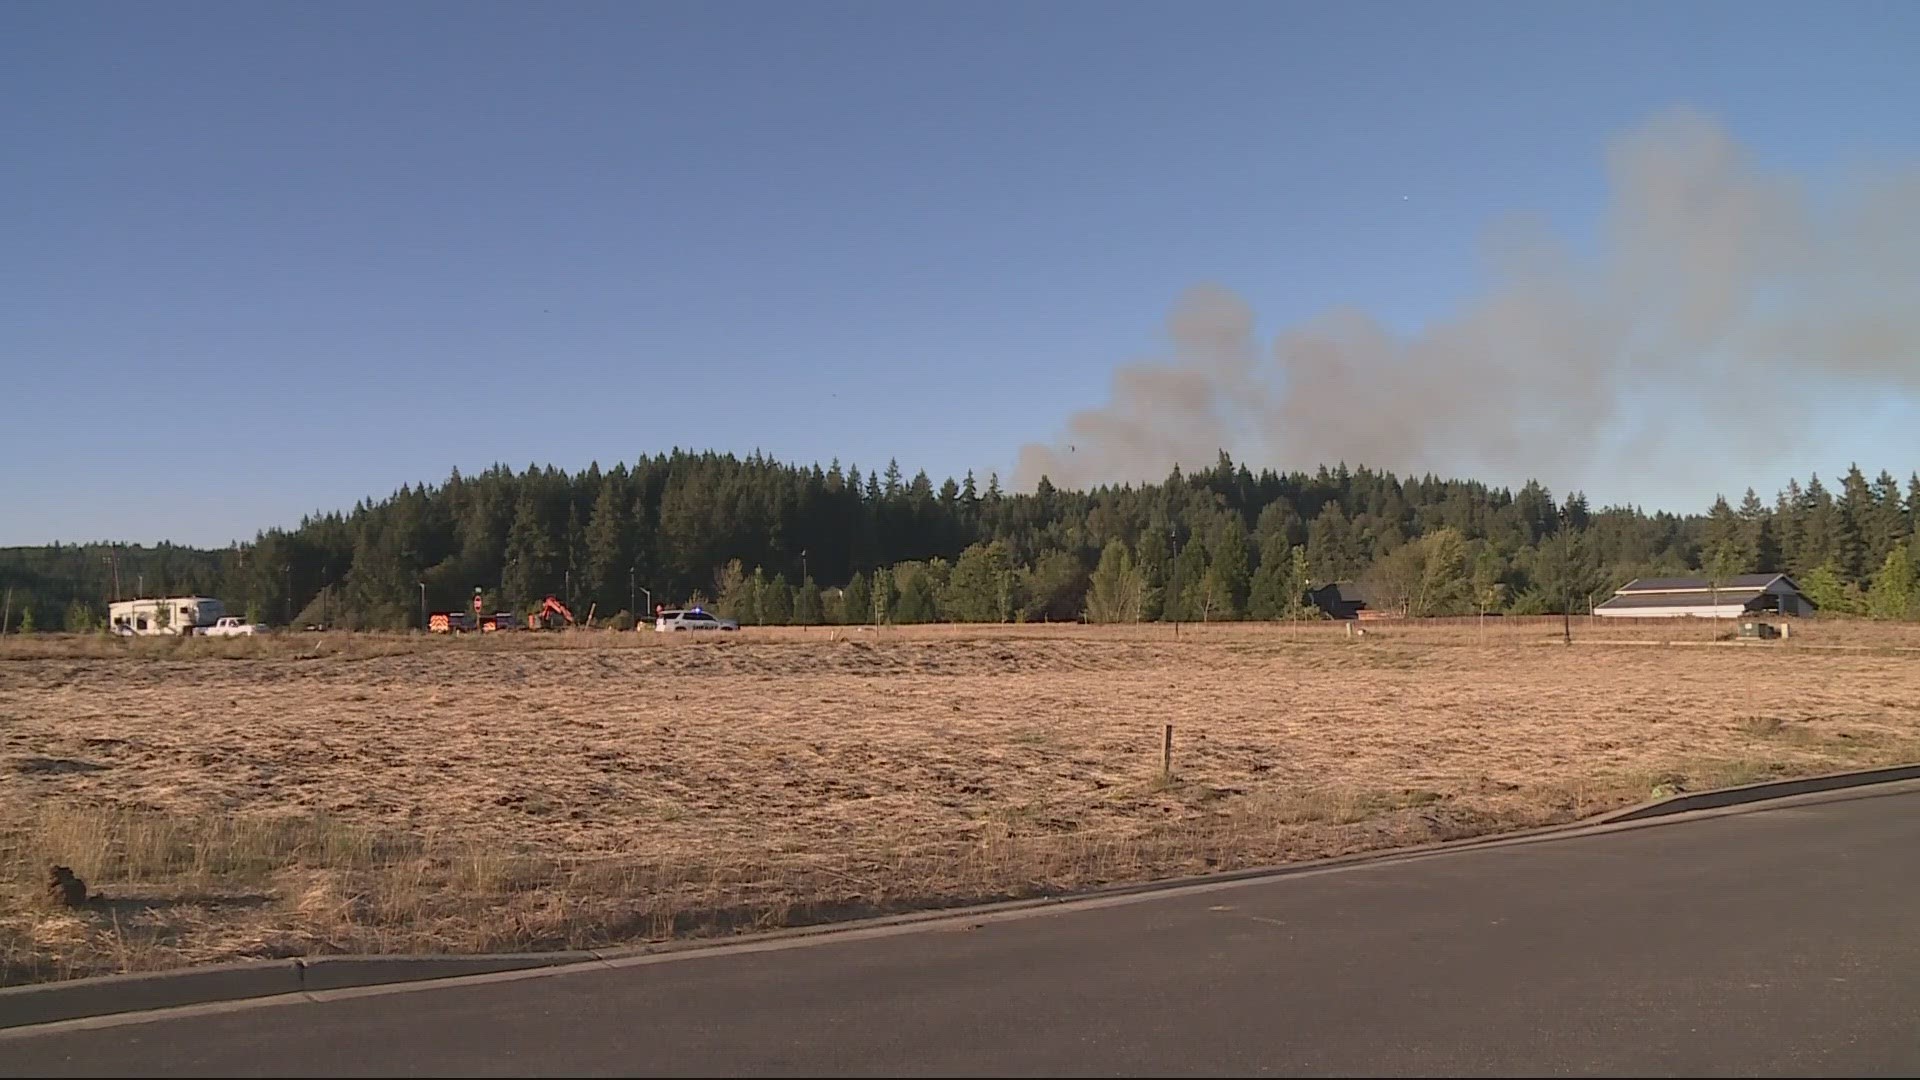 The fire in Clark County has resulted in evacuation orders for people within roughly a mile radius of Jenny Creek Road.